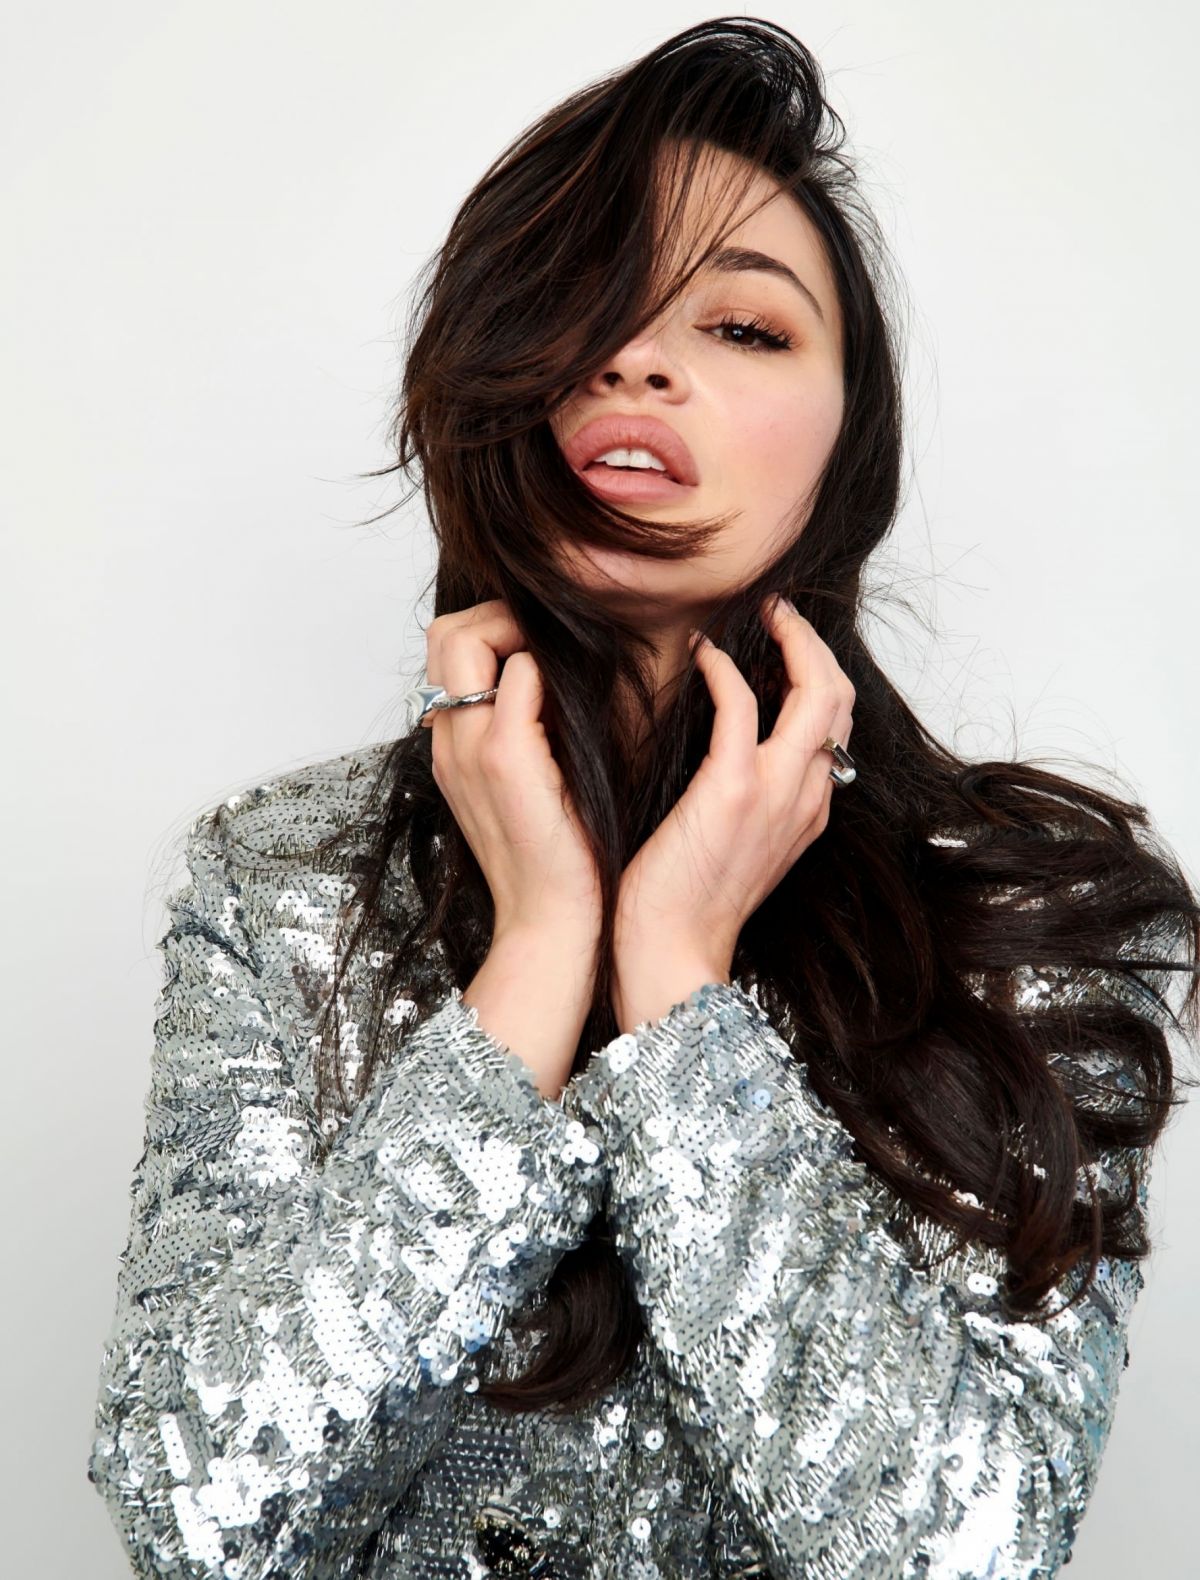 Crystal Reed Poses for TV Guide Magazine at New York Comic Con, Oct 2022